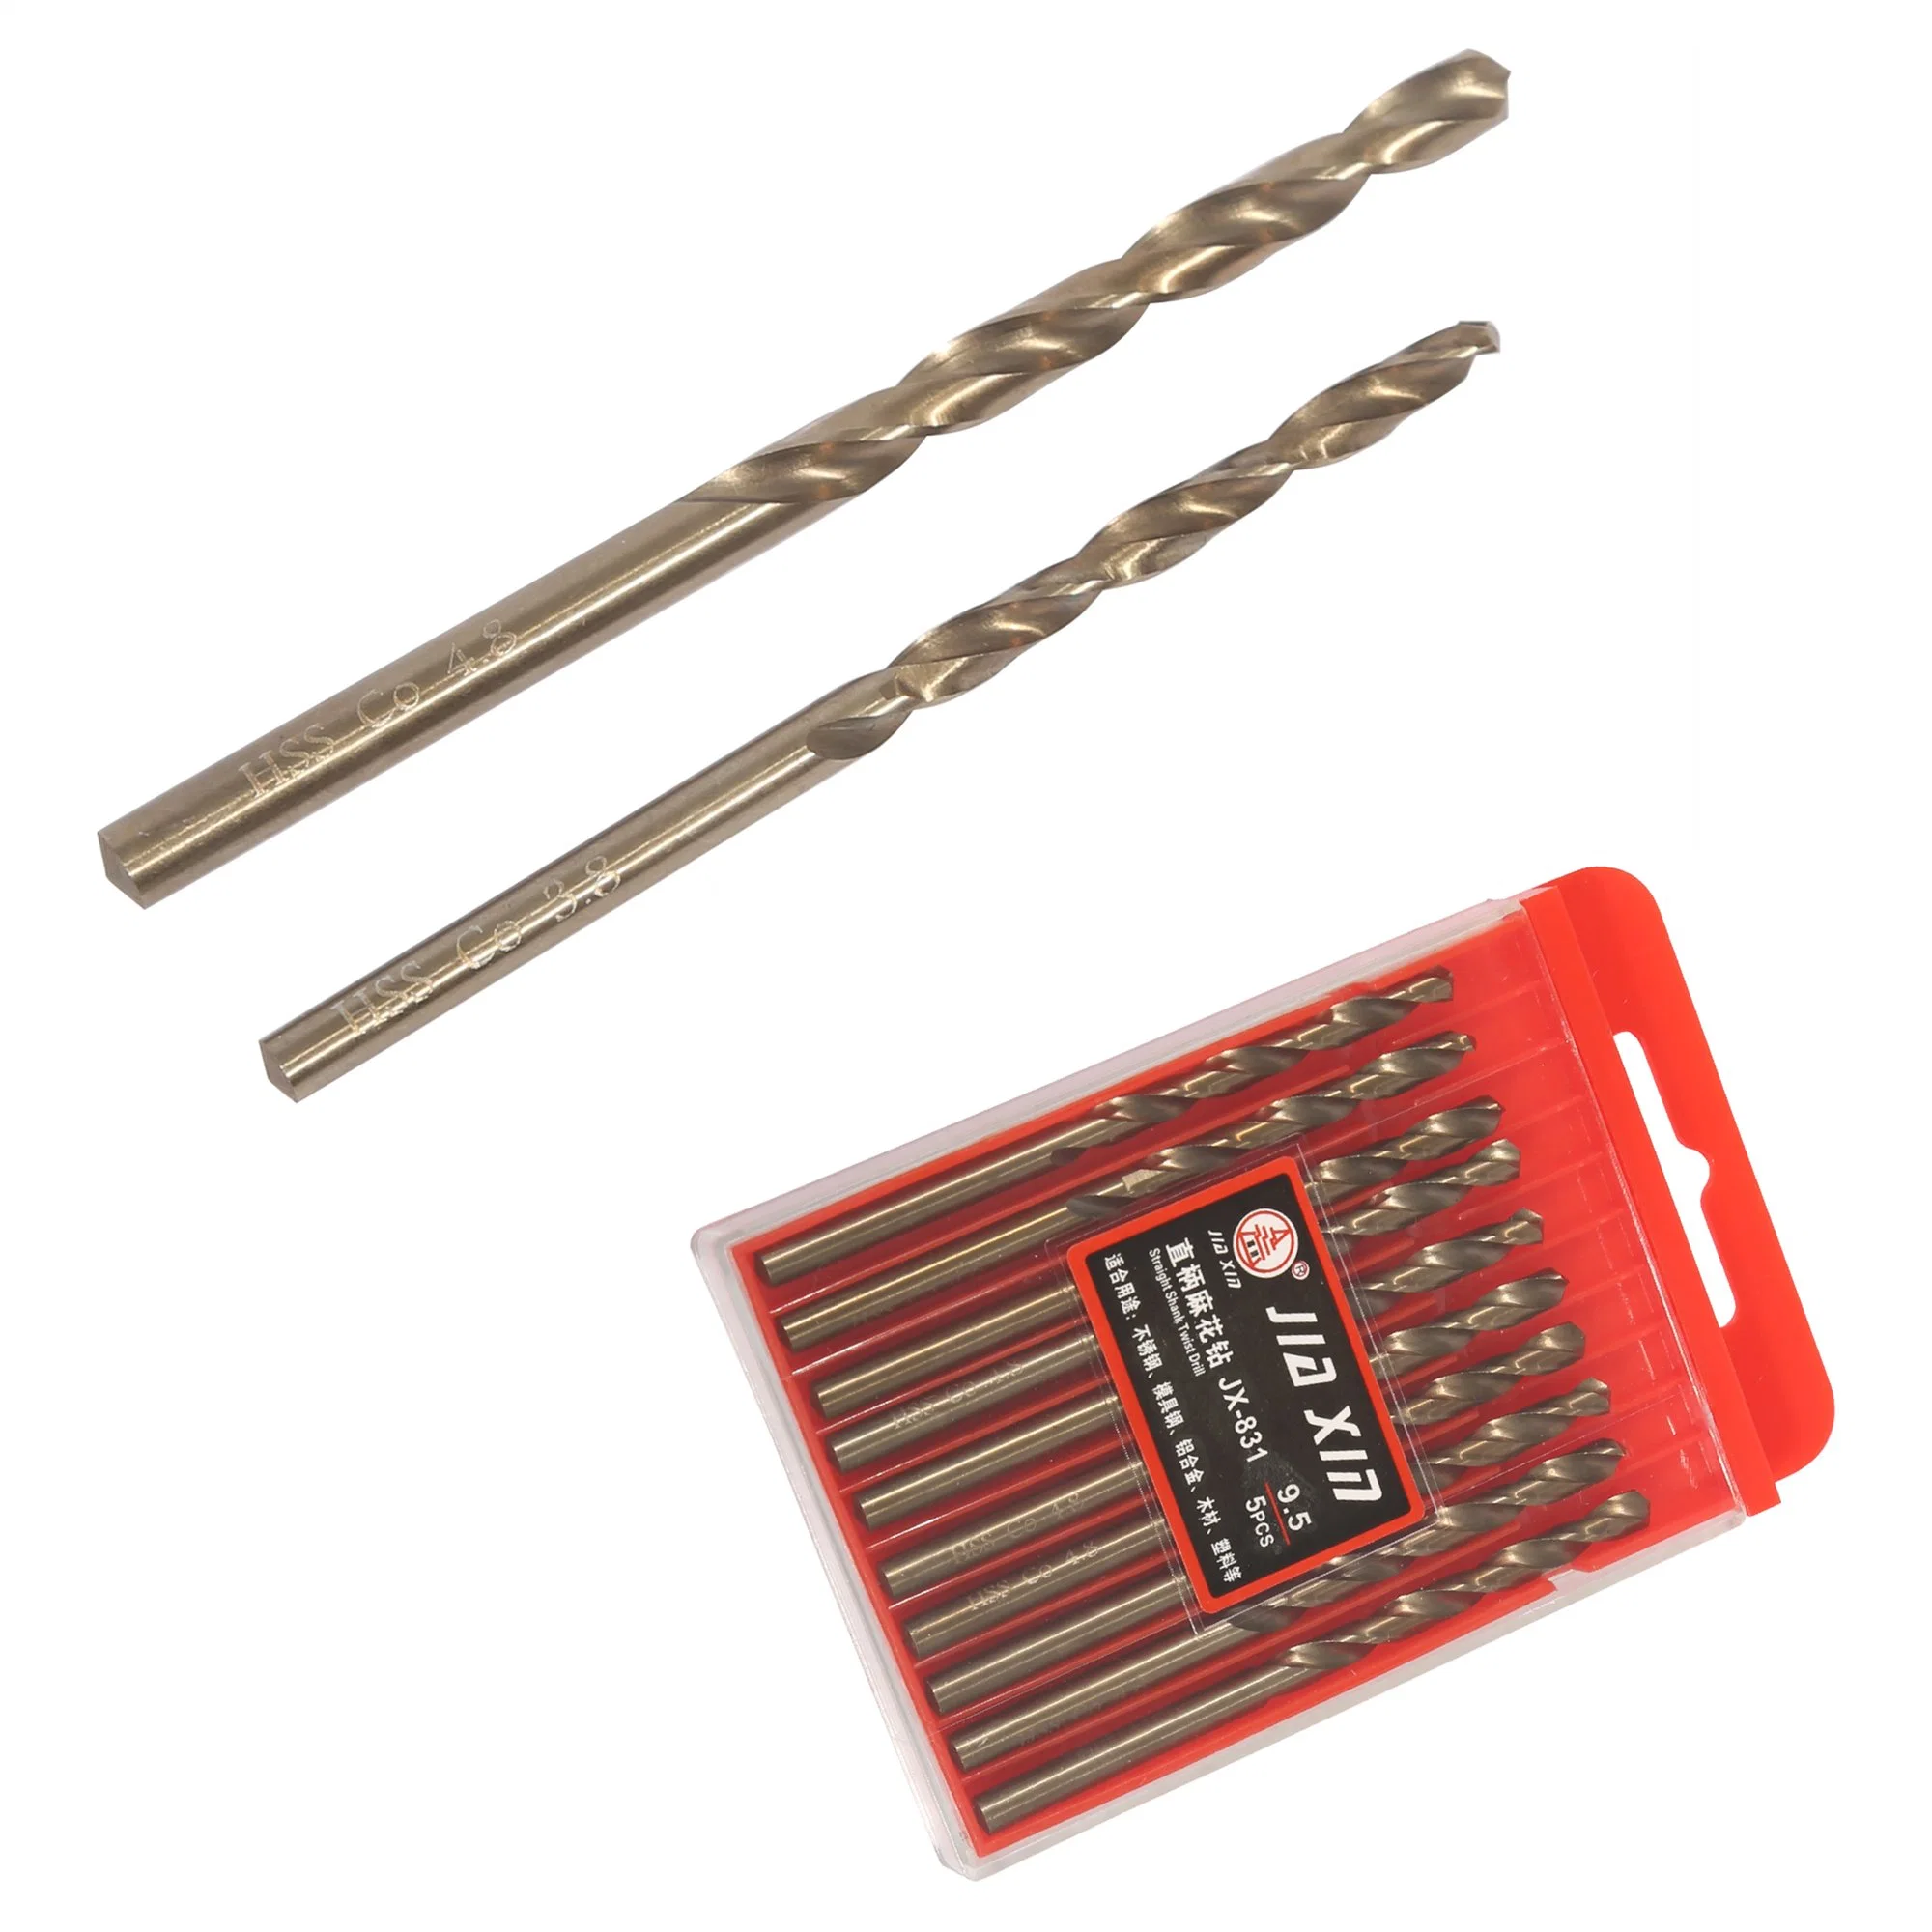 HSS Drills Bits Factory Power Tools Twist for Metal Stainless Steel Drilling Drill Bit